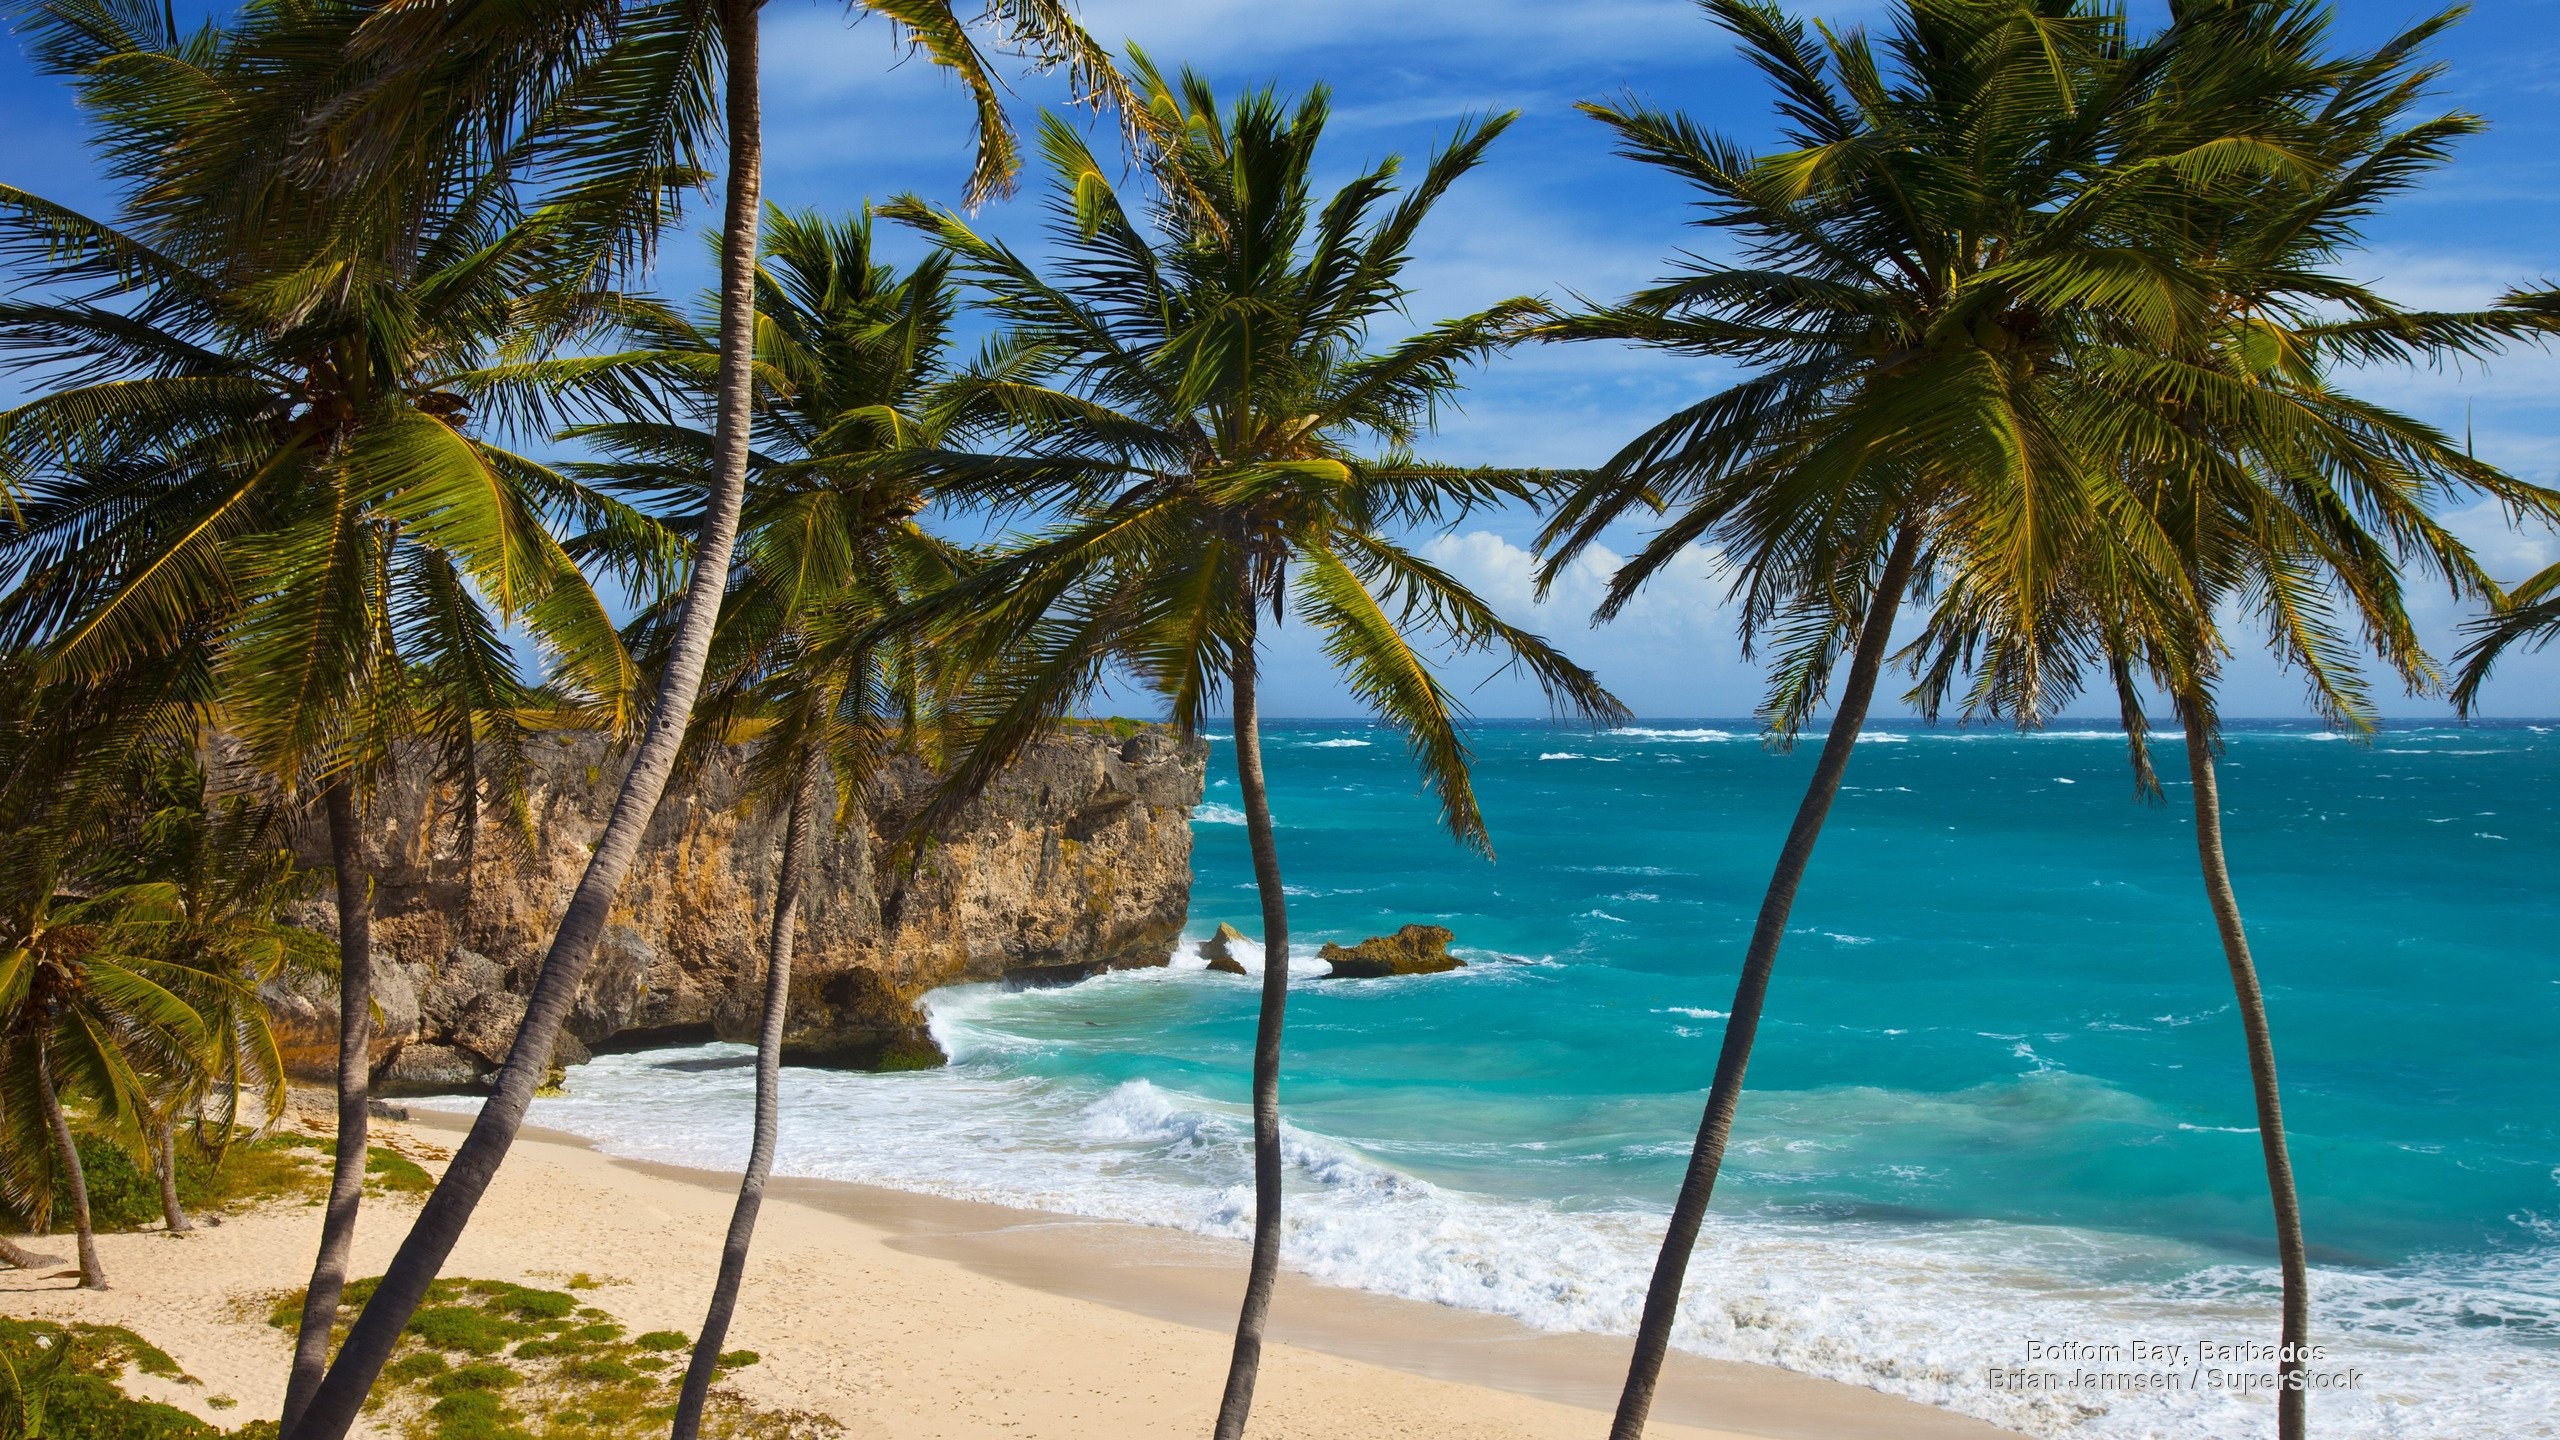 Bottom Bay Barbados, Scenic beach, Natural beauty, Relaxing atmosphere, 2560x1440 HD Desktop